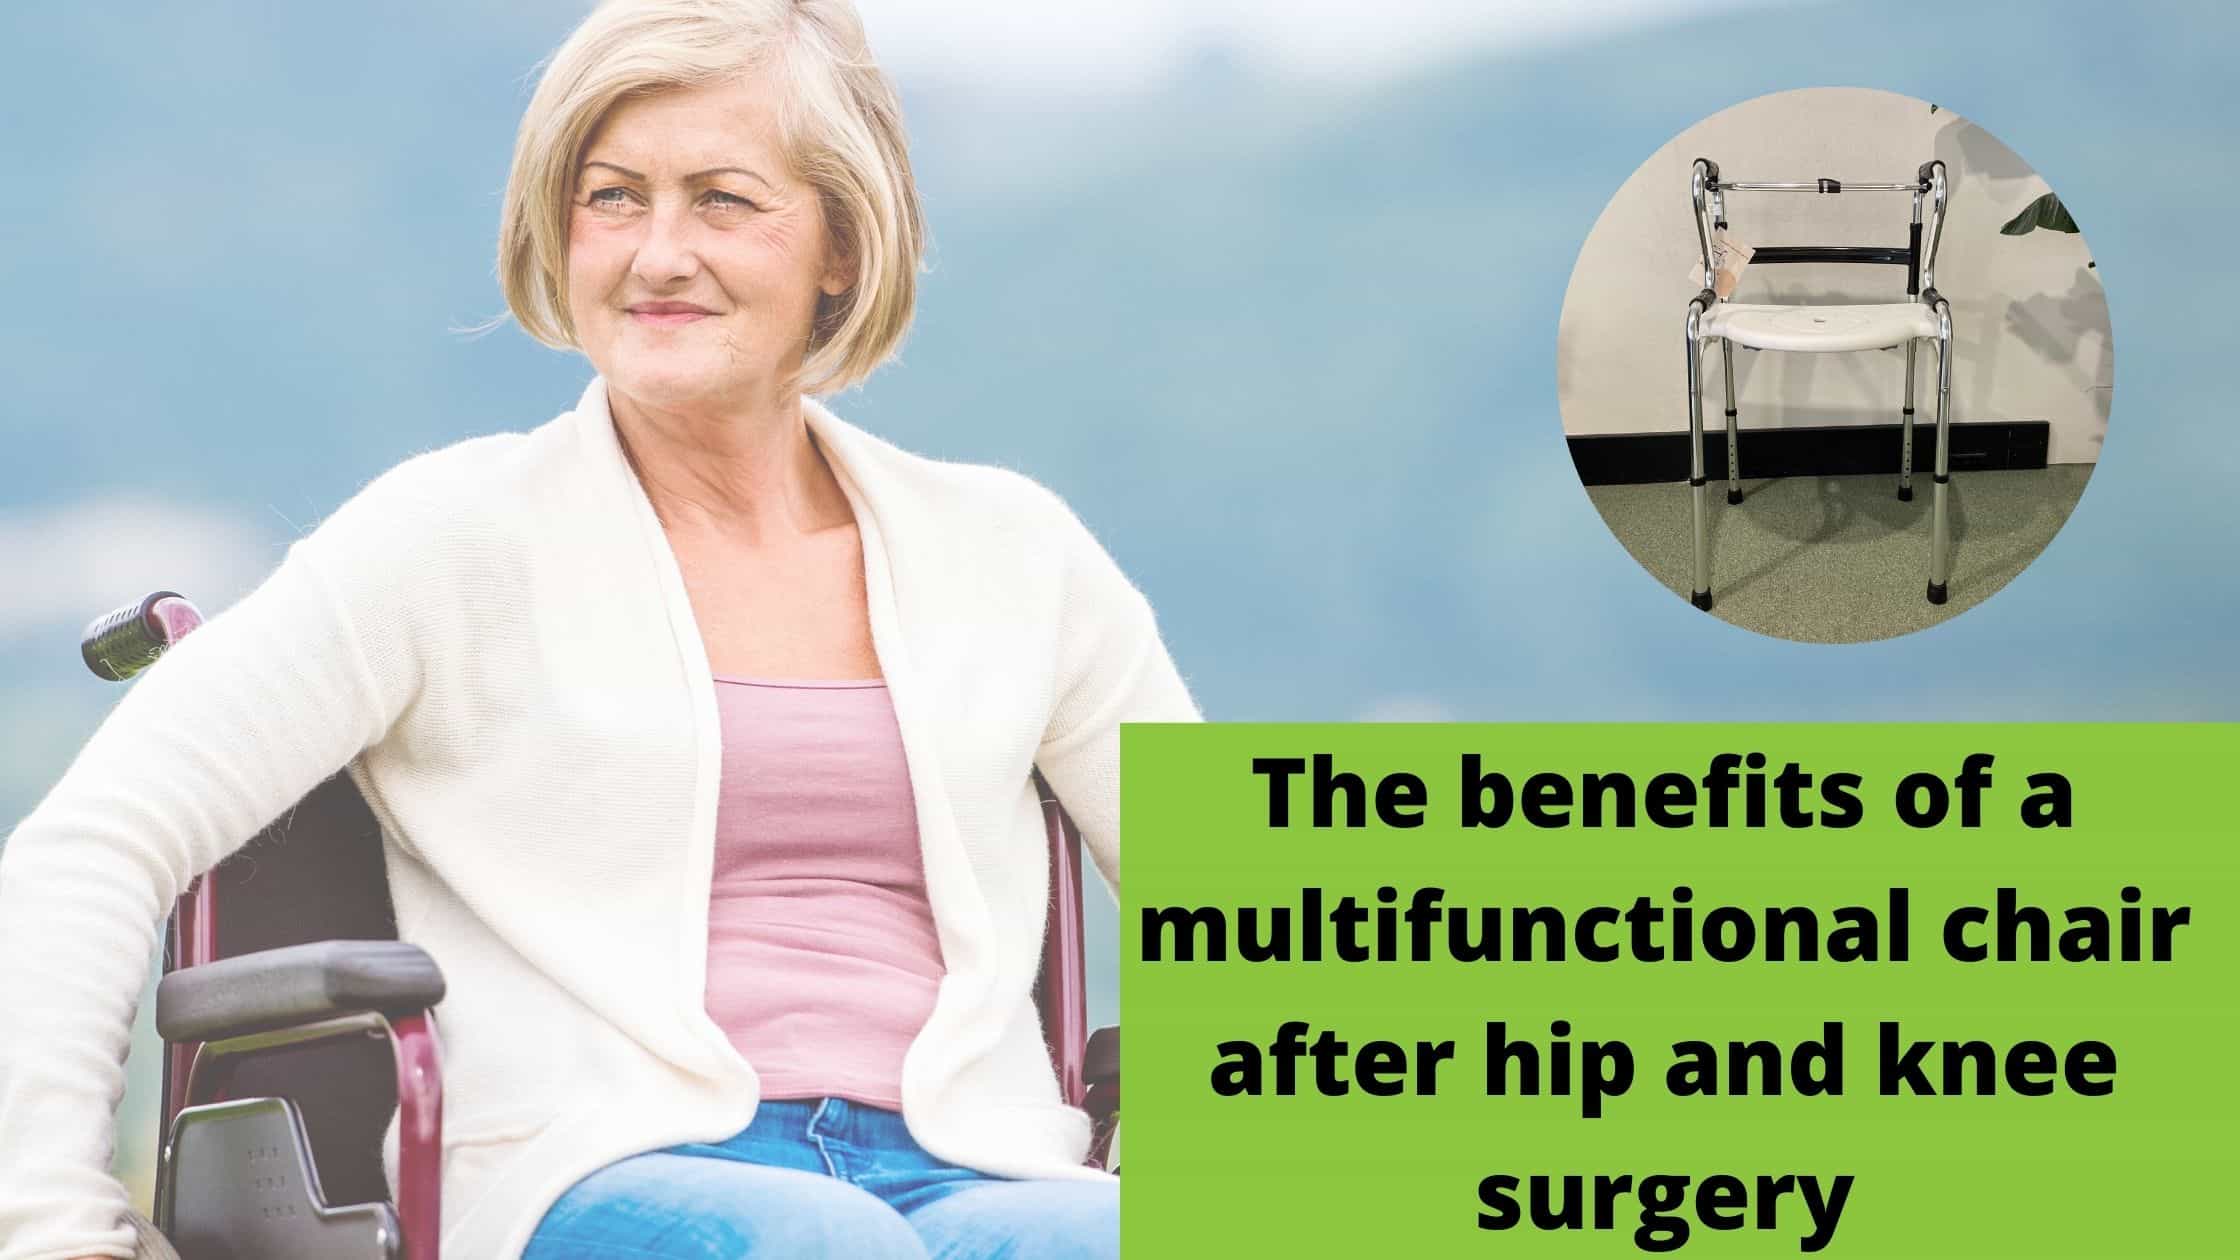 The benefits of the Multifunctional Chair after hip or knee surgery